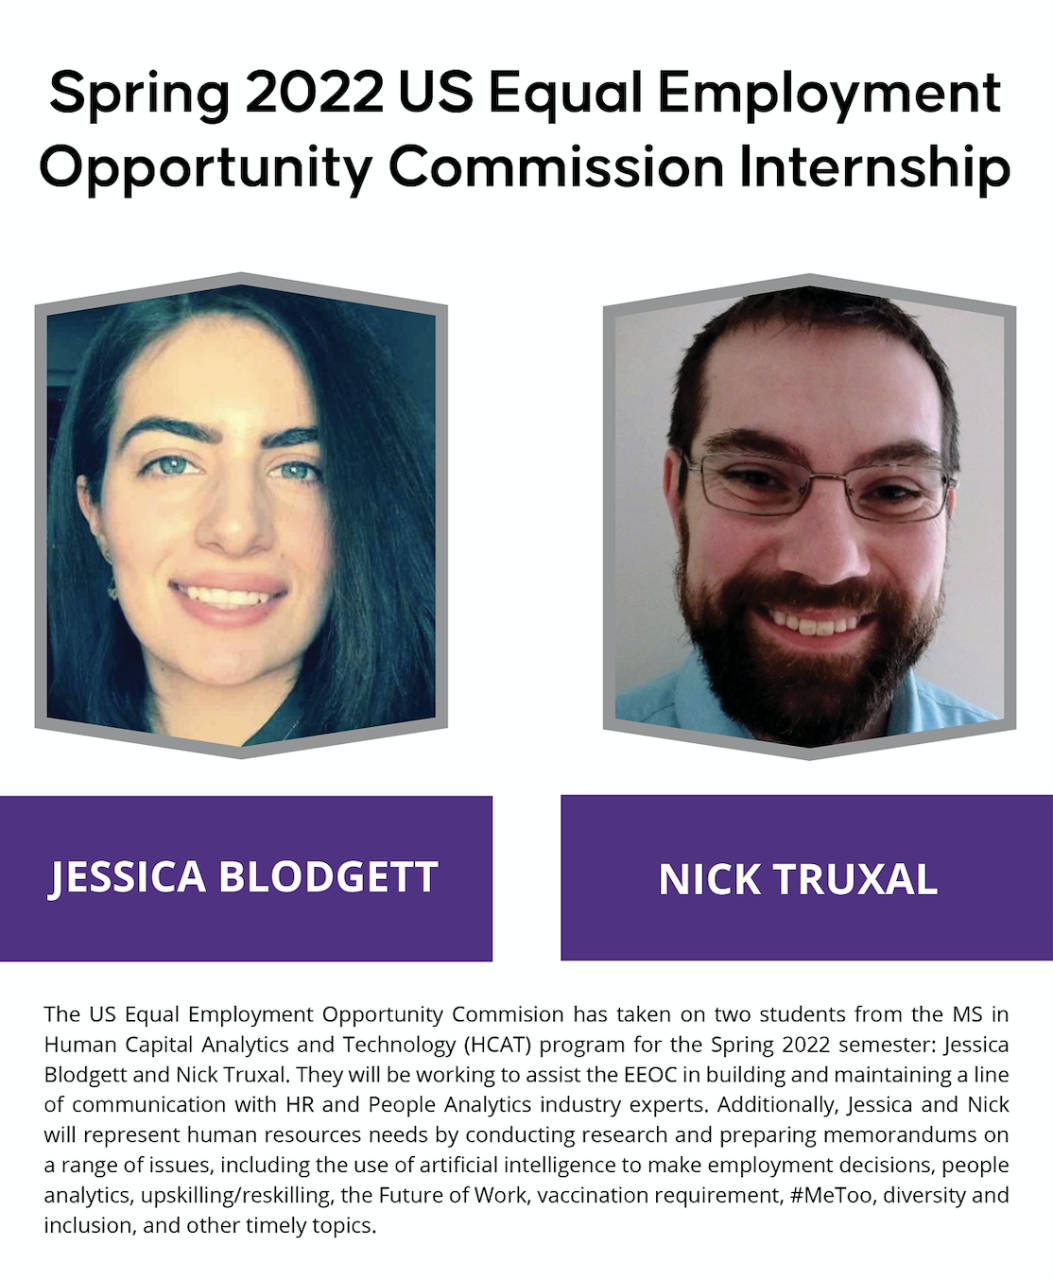 Jessica Blodgett and Nick Truxal for EEOC